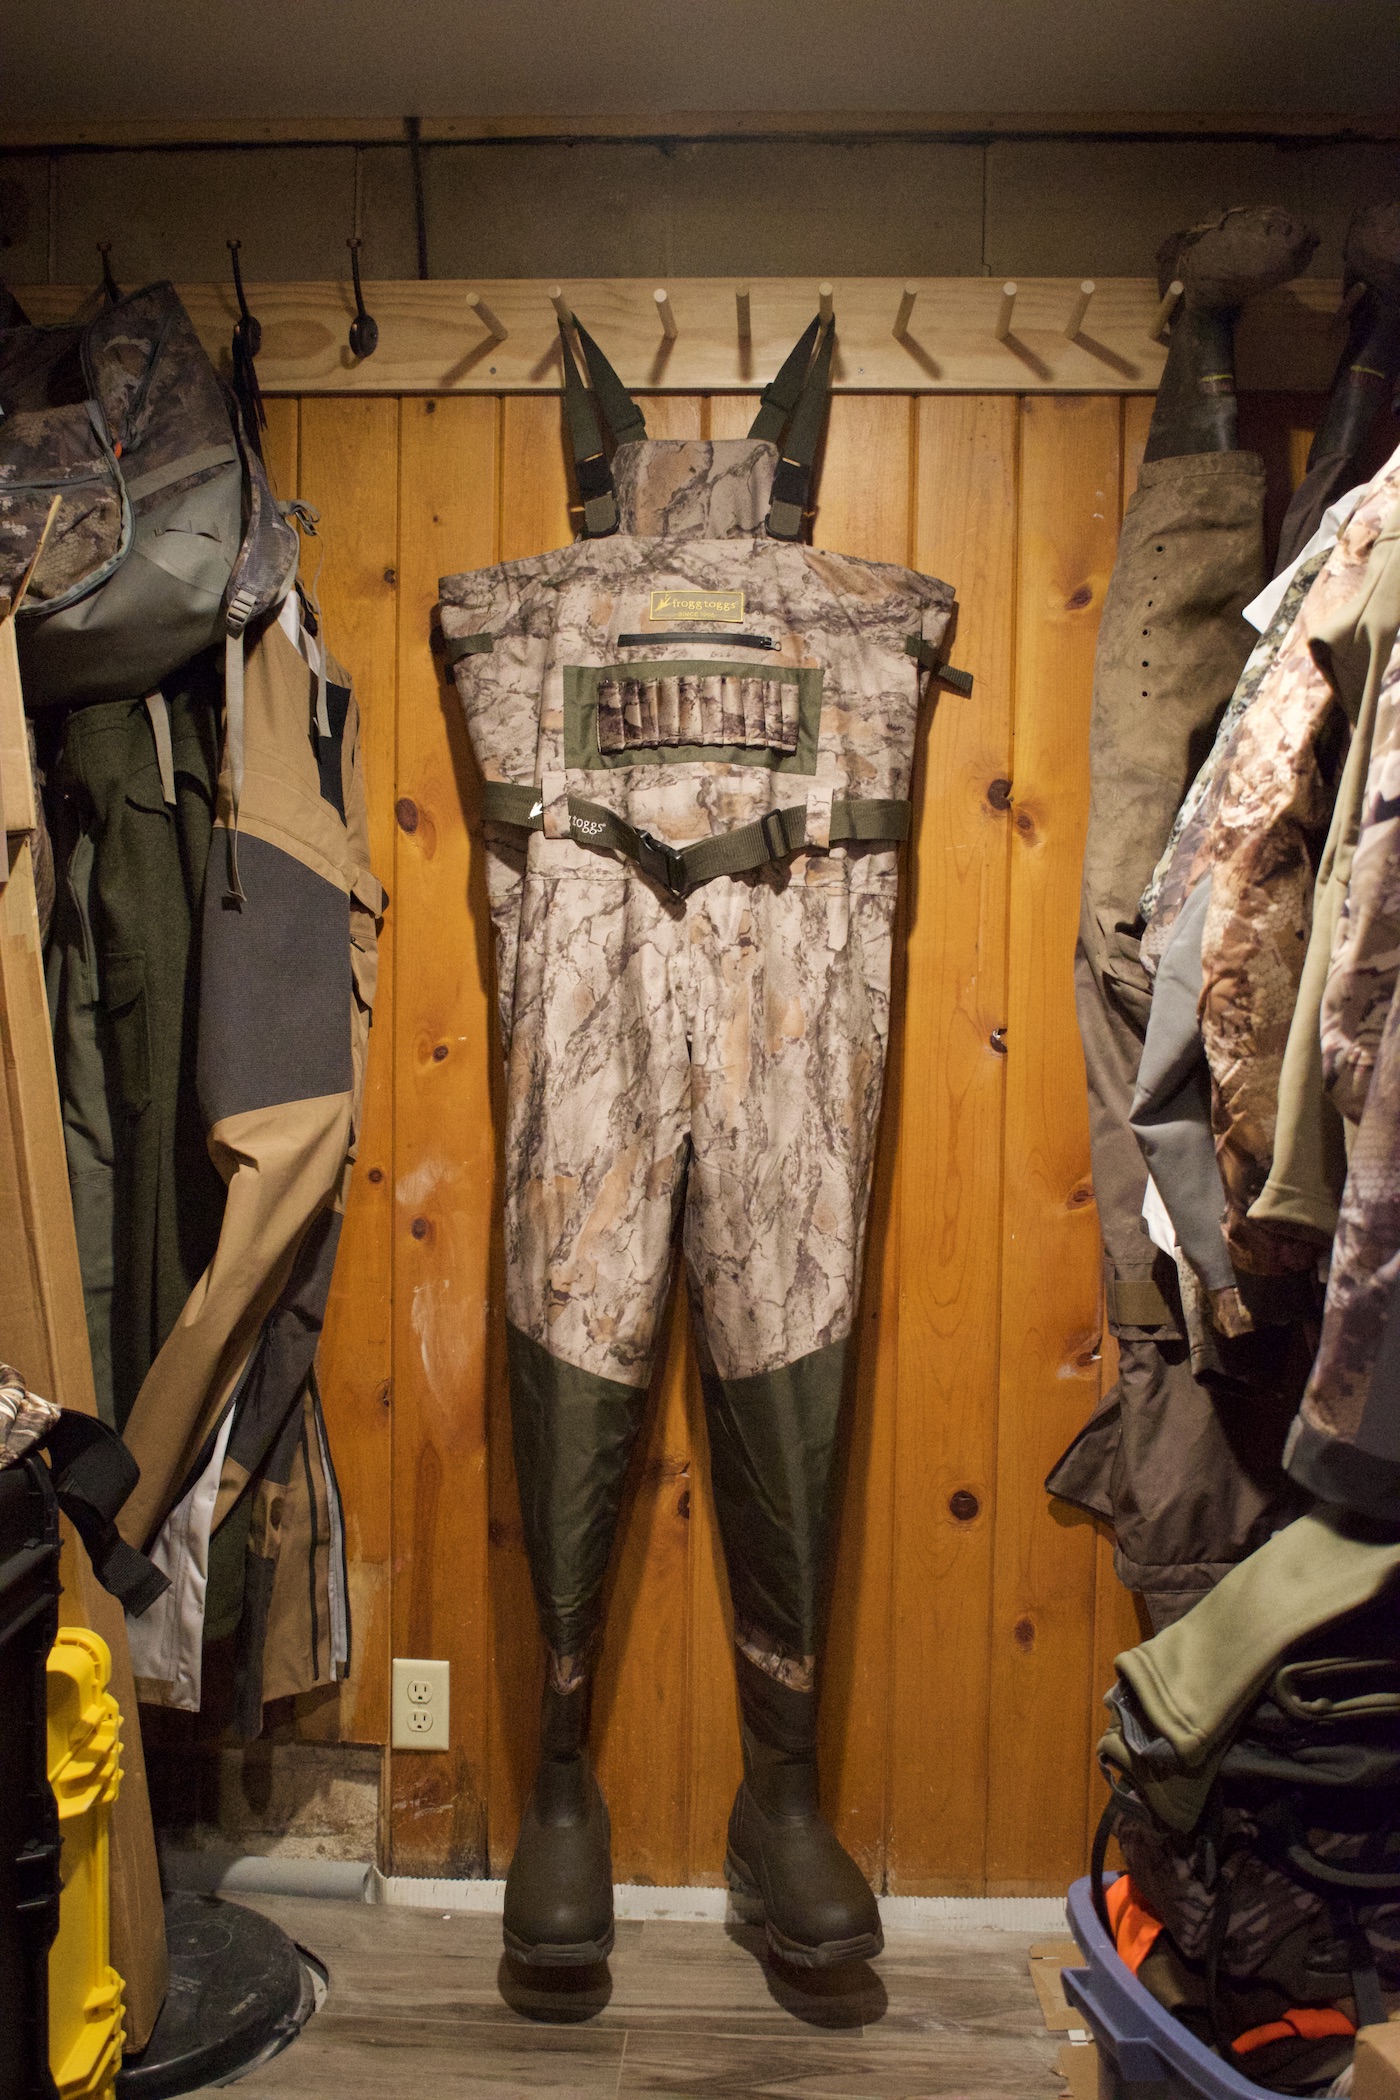 The best value duck hunting waders have a camo pattern and black boots